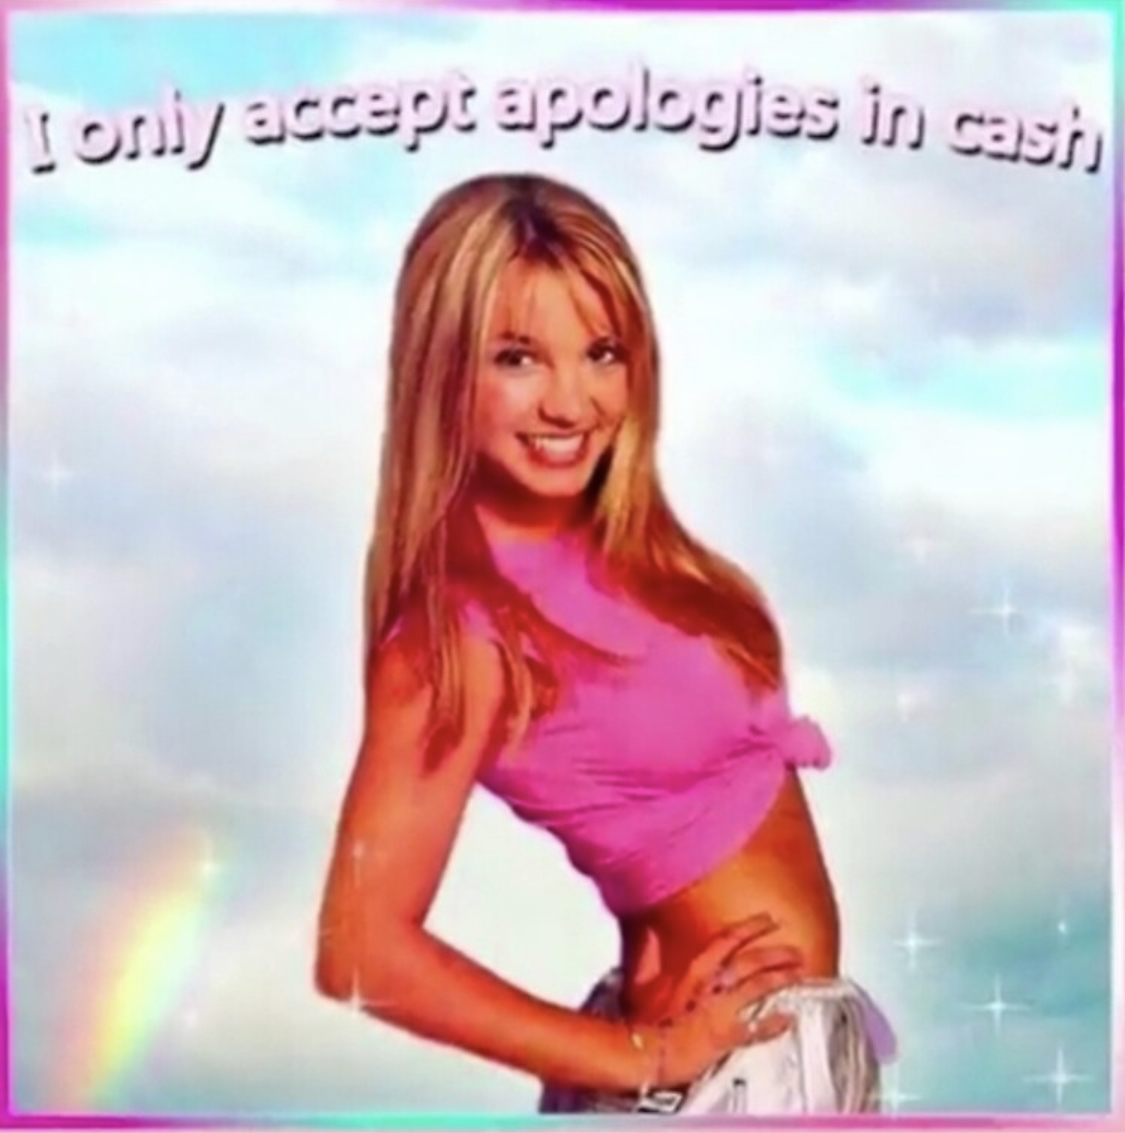 High Quality I only accept apologies in cash Blank Meme Template